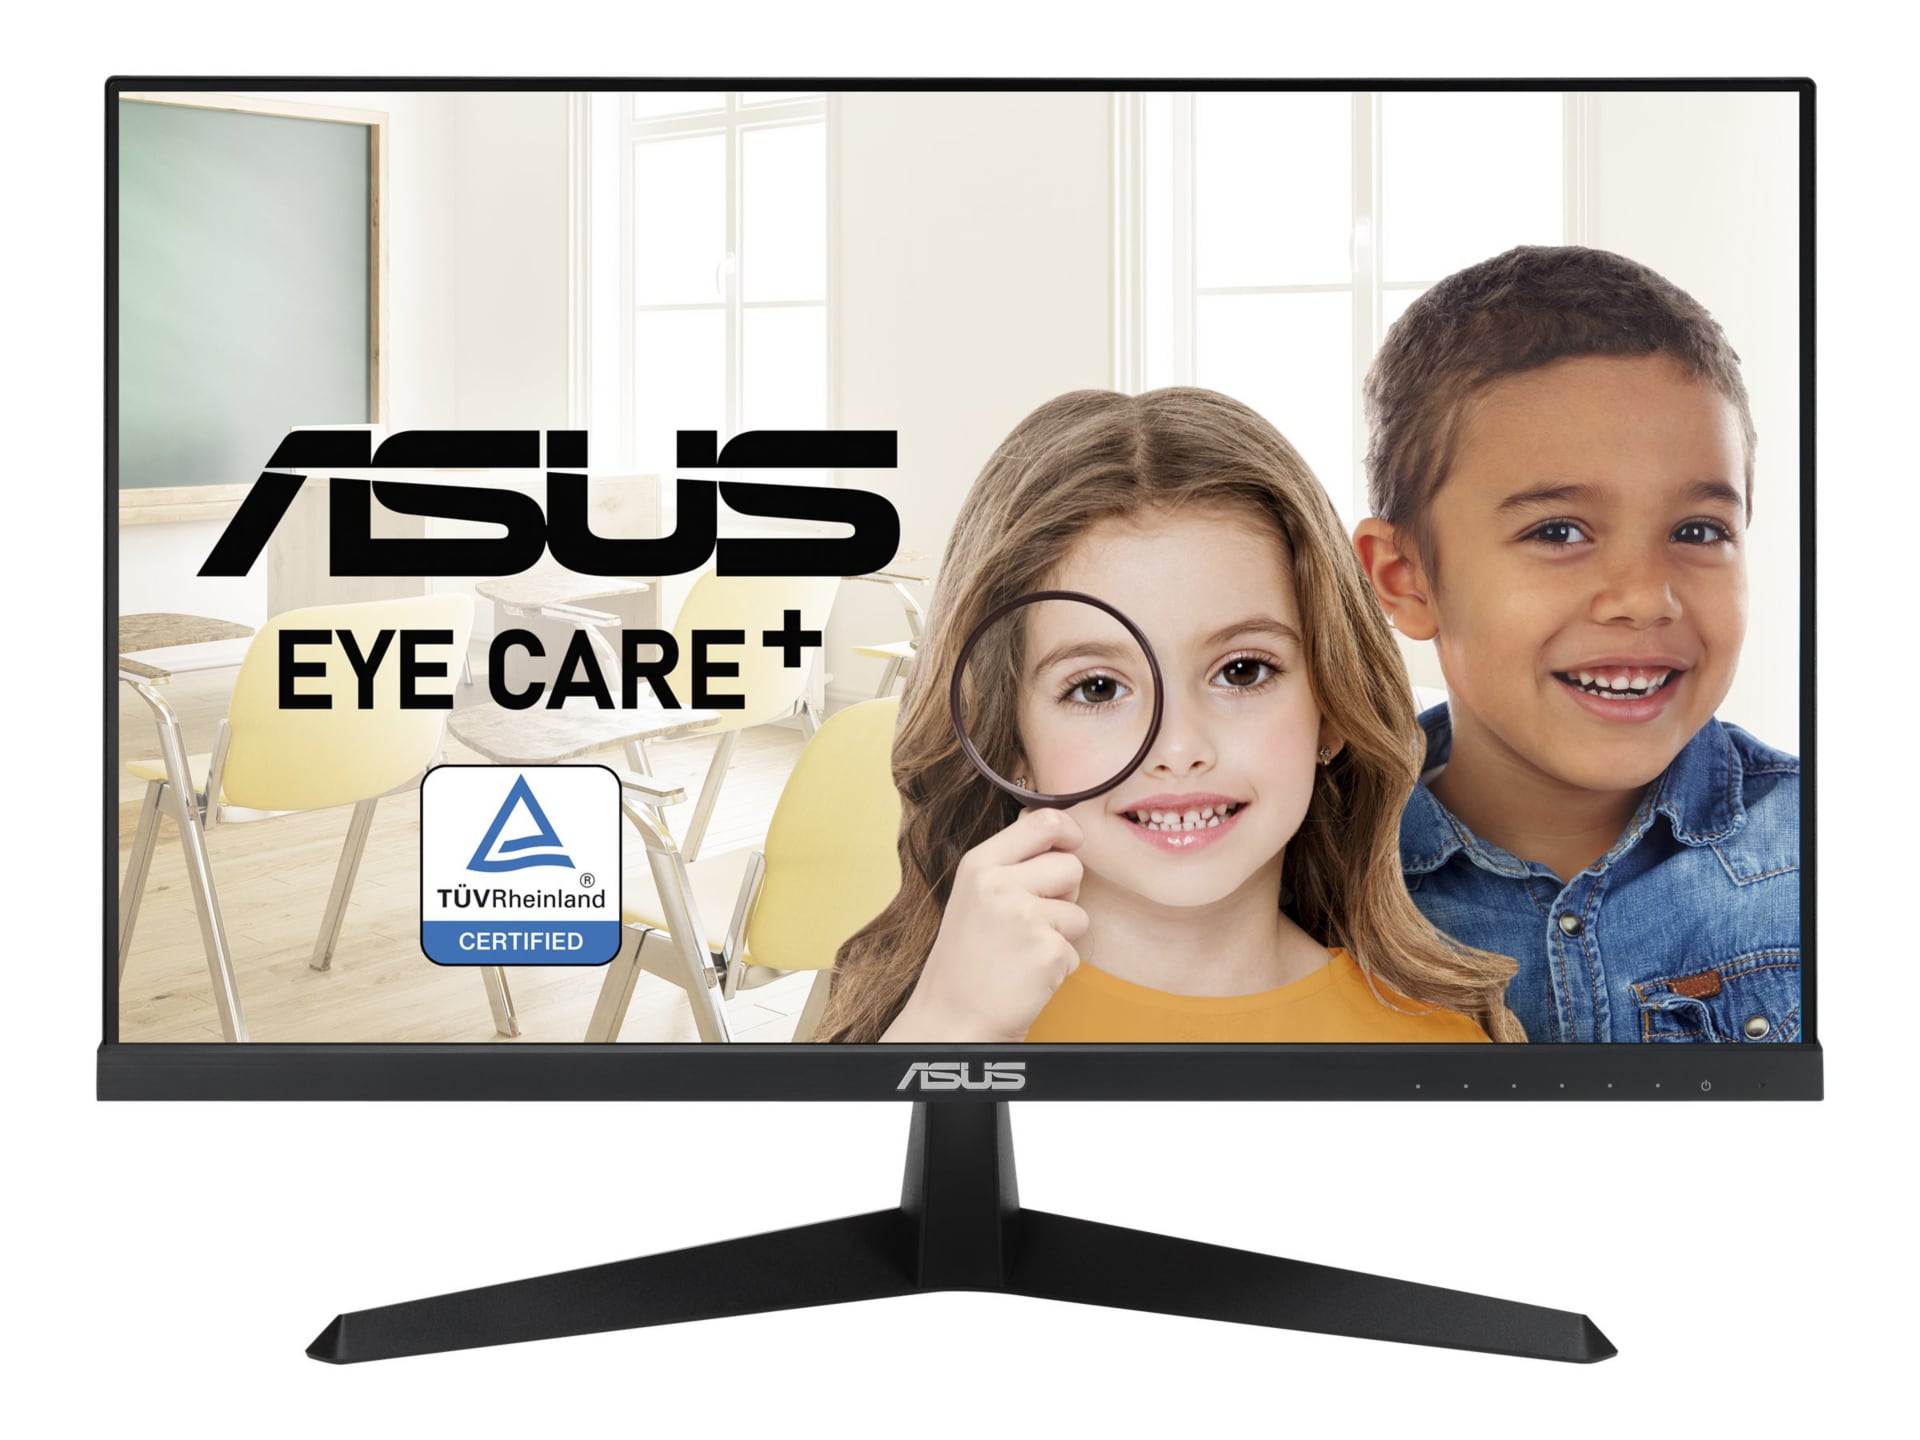 ASUS VY249HE - LED monitor - Full HD (1080p) - 23.8"